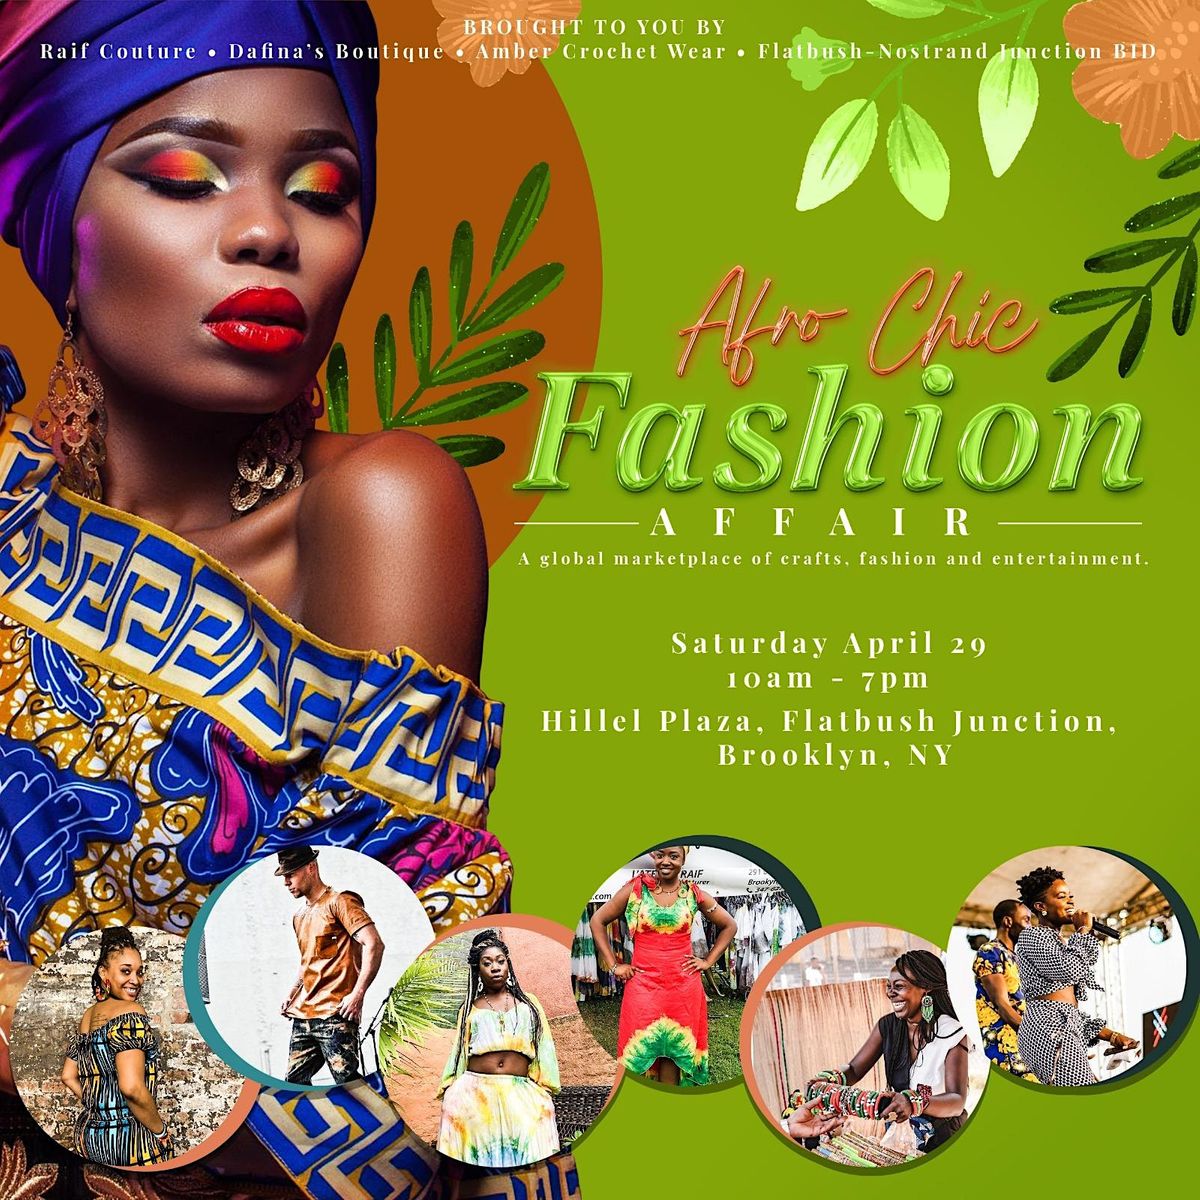 Afro Chic Fashion Affair | Hillel Place, Brooklyn, NY | April 29, 2023